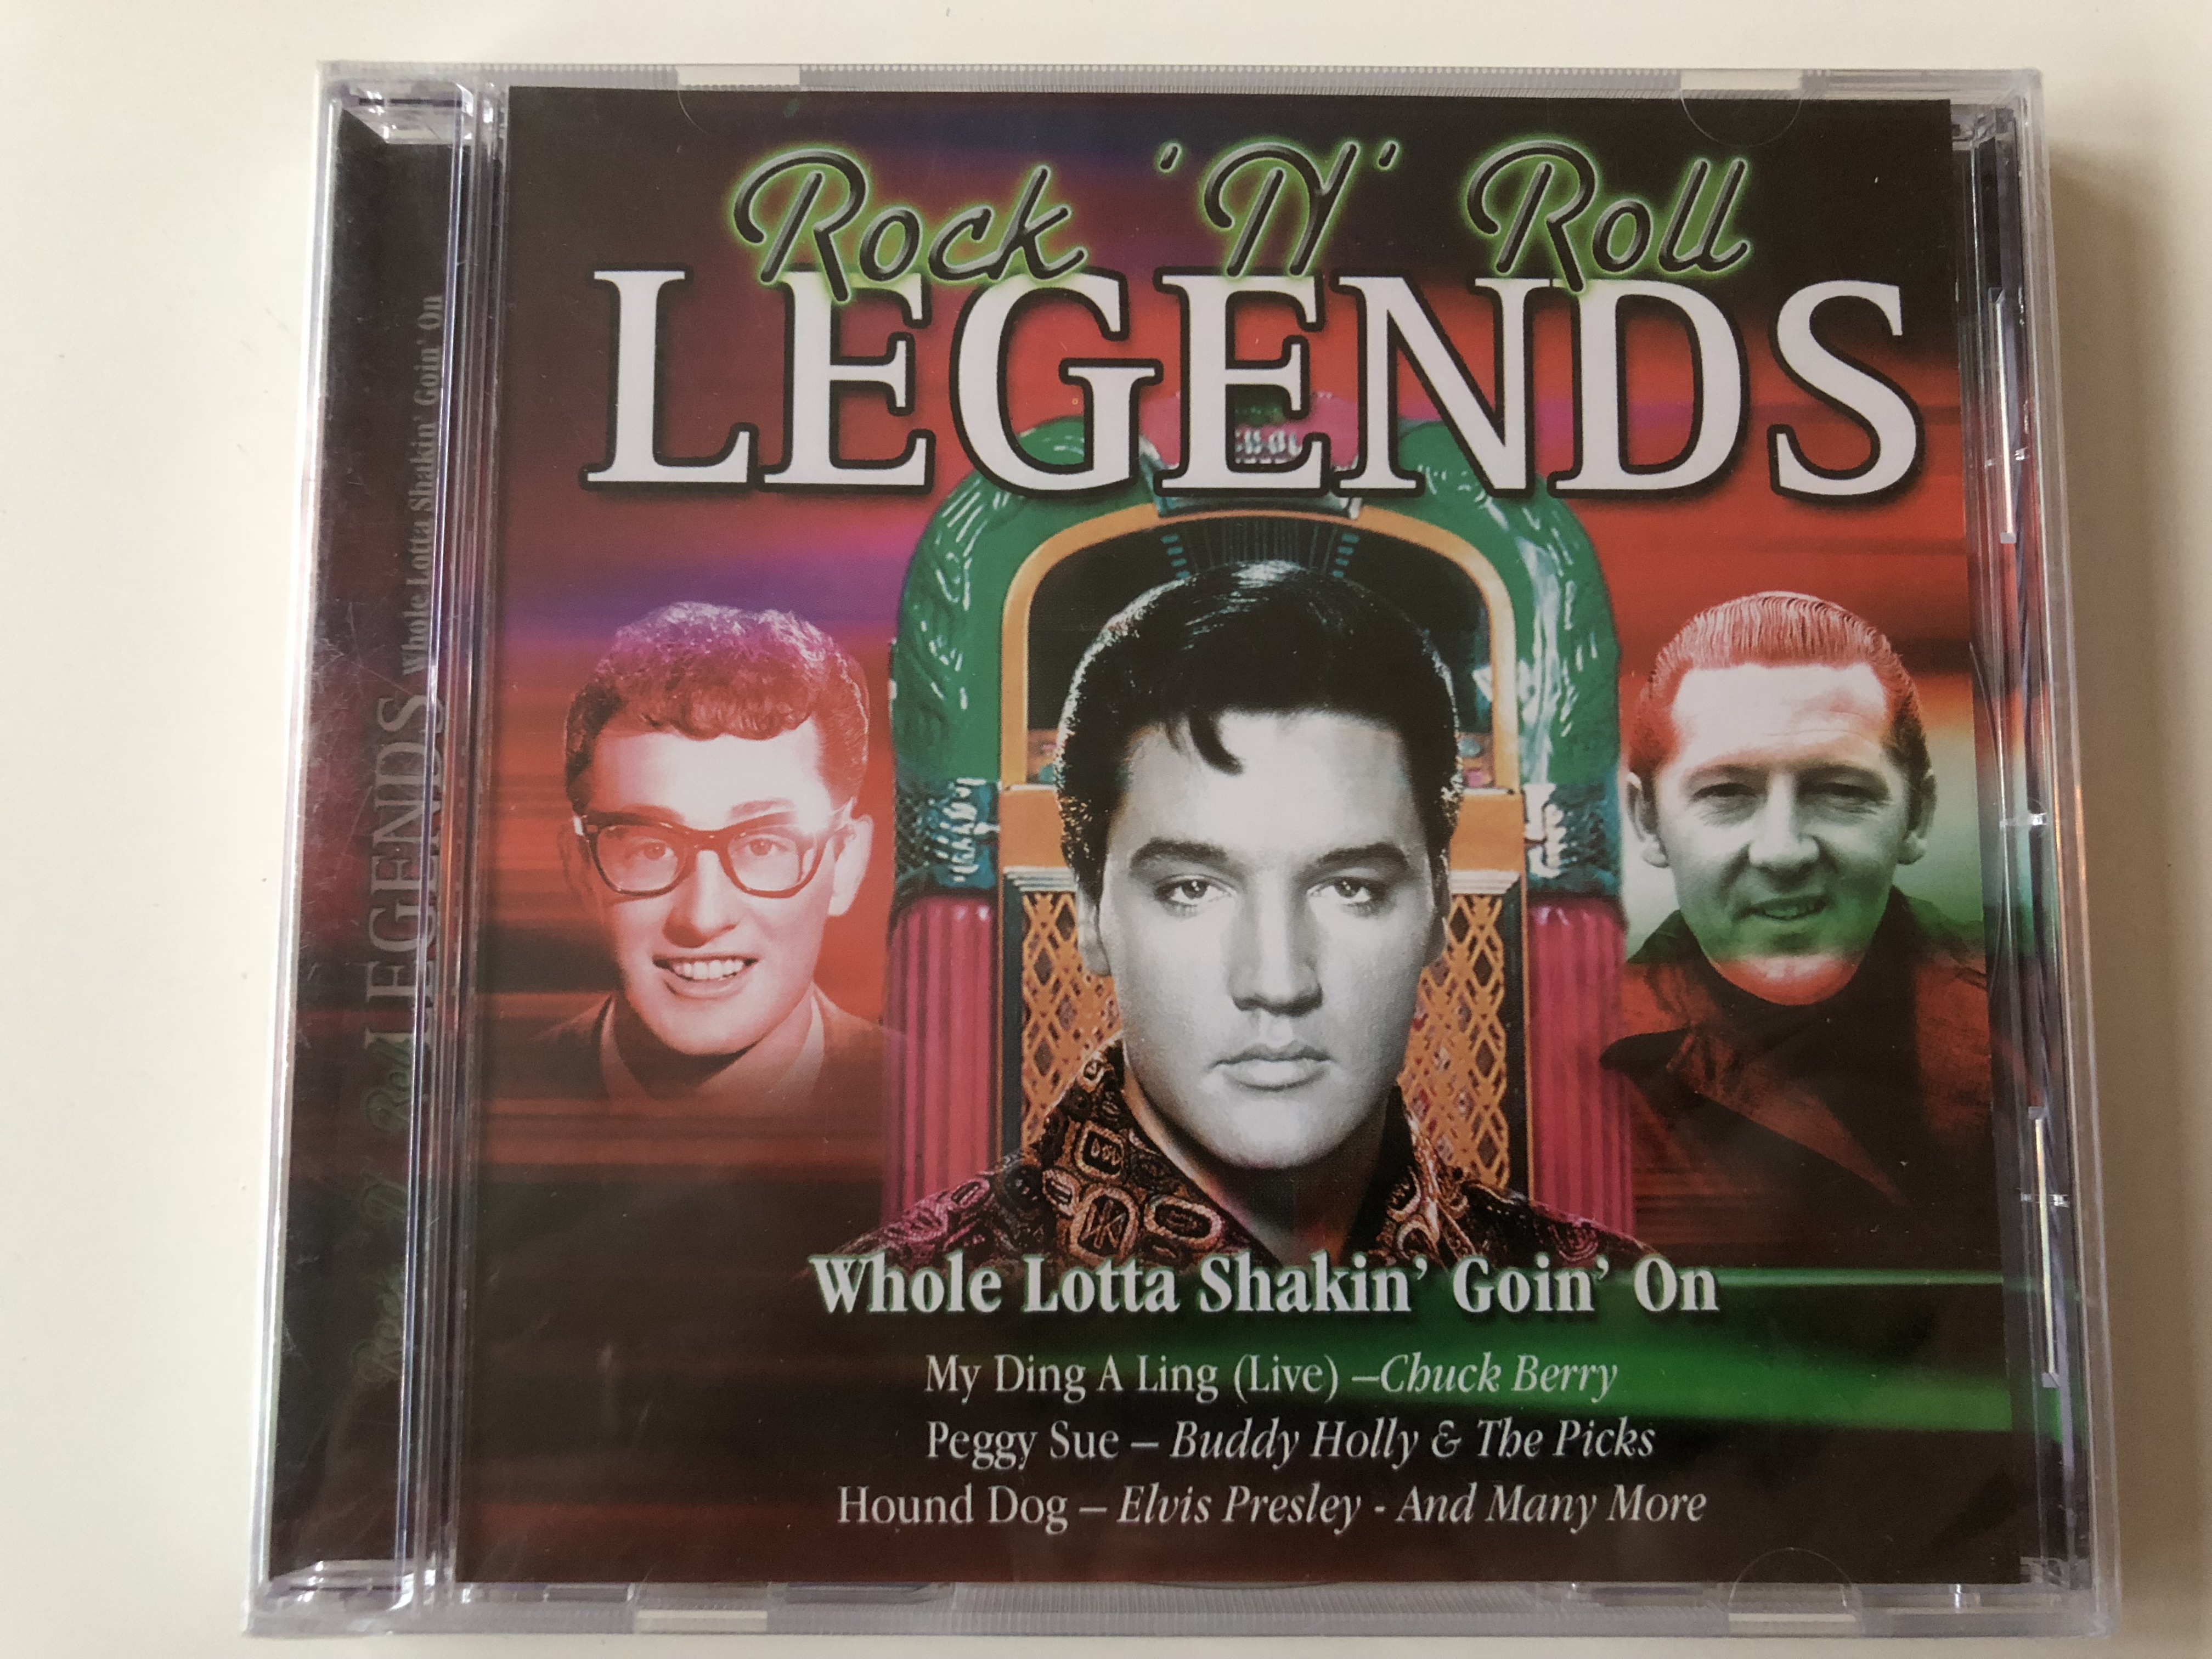 rock-n-roll-legends-whole-lotta-shakin-goin-on-my-ding-a-ling-live-chuck-berry-peggy-sue-buddy-holly-the-picks-hound-dog-elvis-presley-...-and-many-more-audio-cd-2004-musicbank-apwcd-1940-1-.jpg